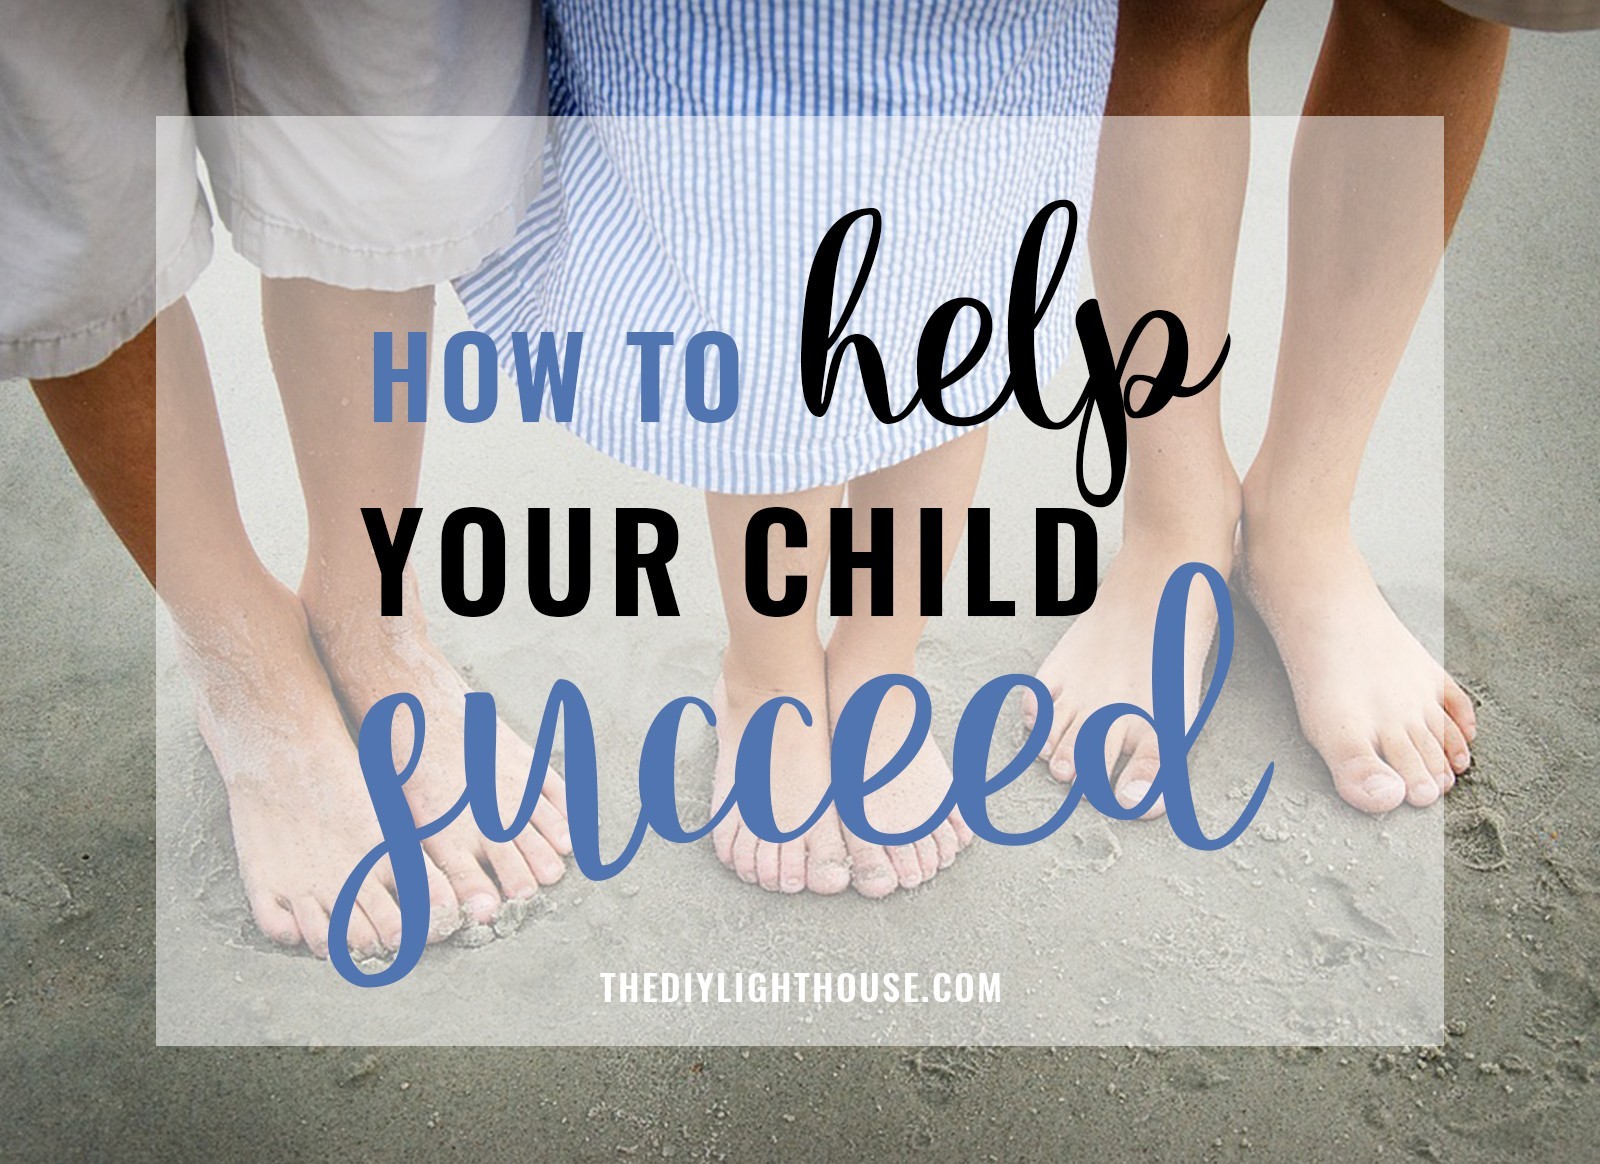 how to help your child succeed